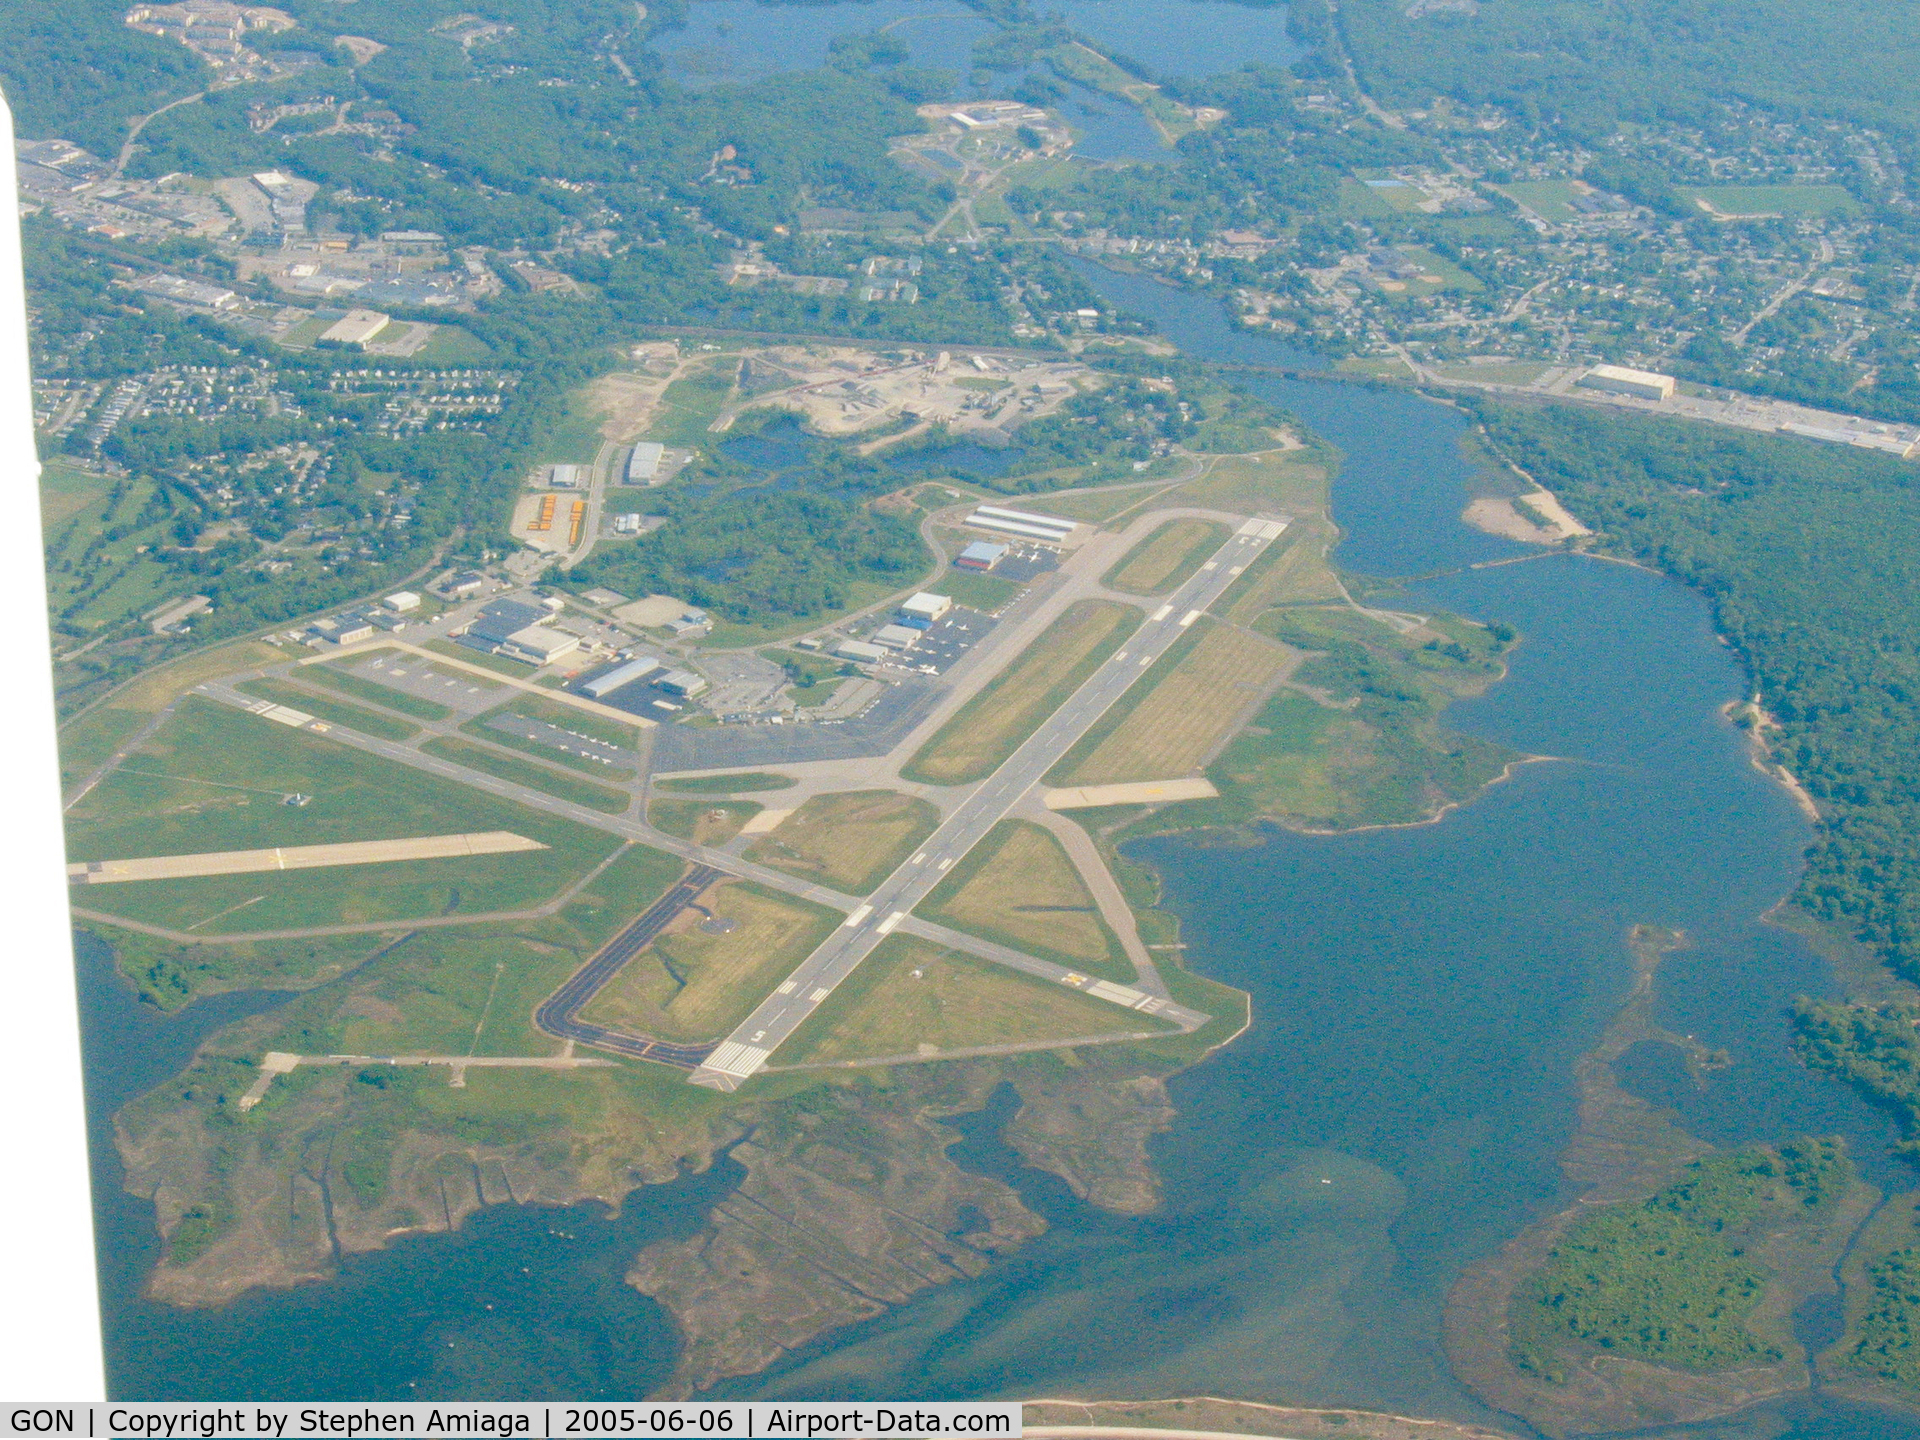 Groton-new London Airport (GON) - Groton from 4500'